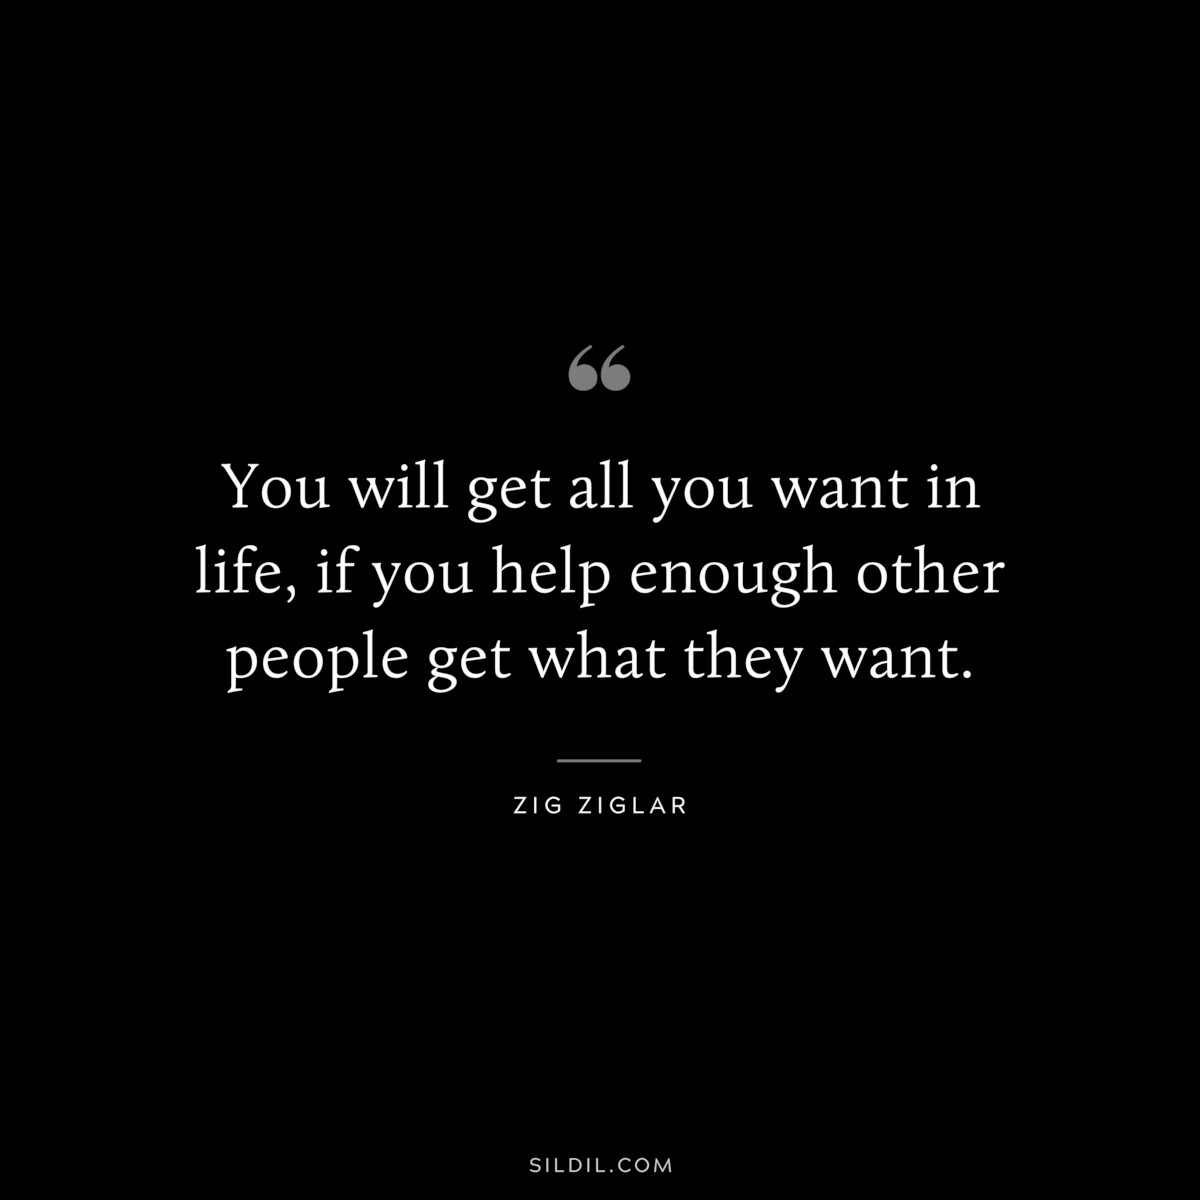 You will get all you want in life, if you help enough other people get what they want. ― Zig Ziglar